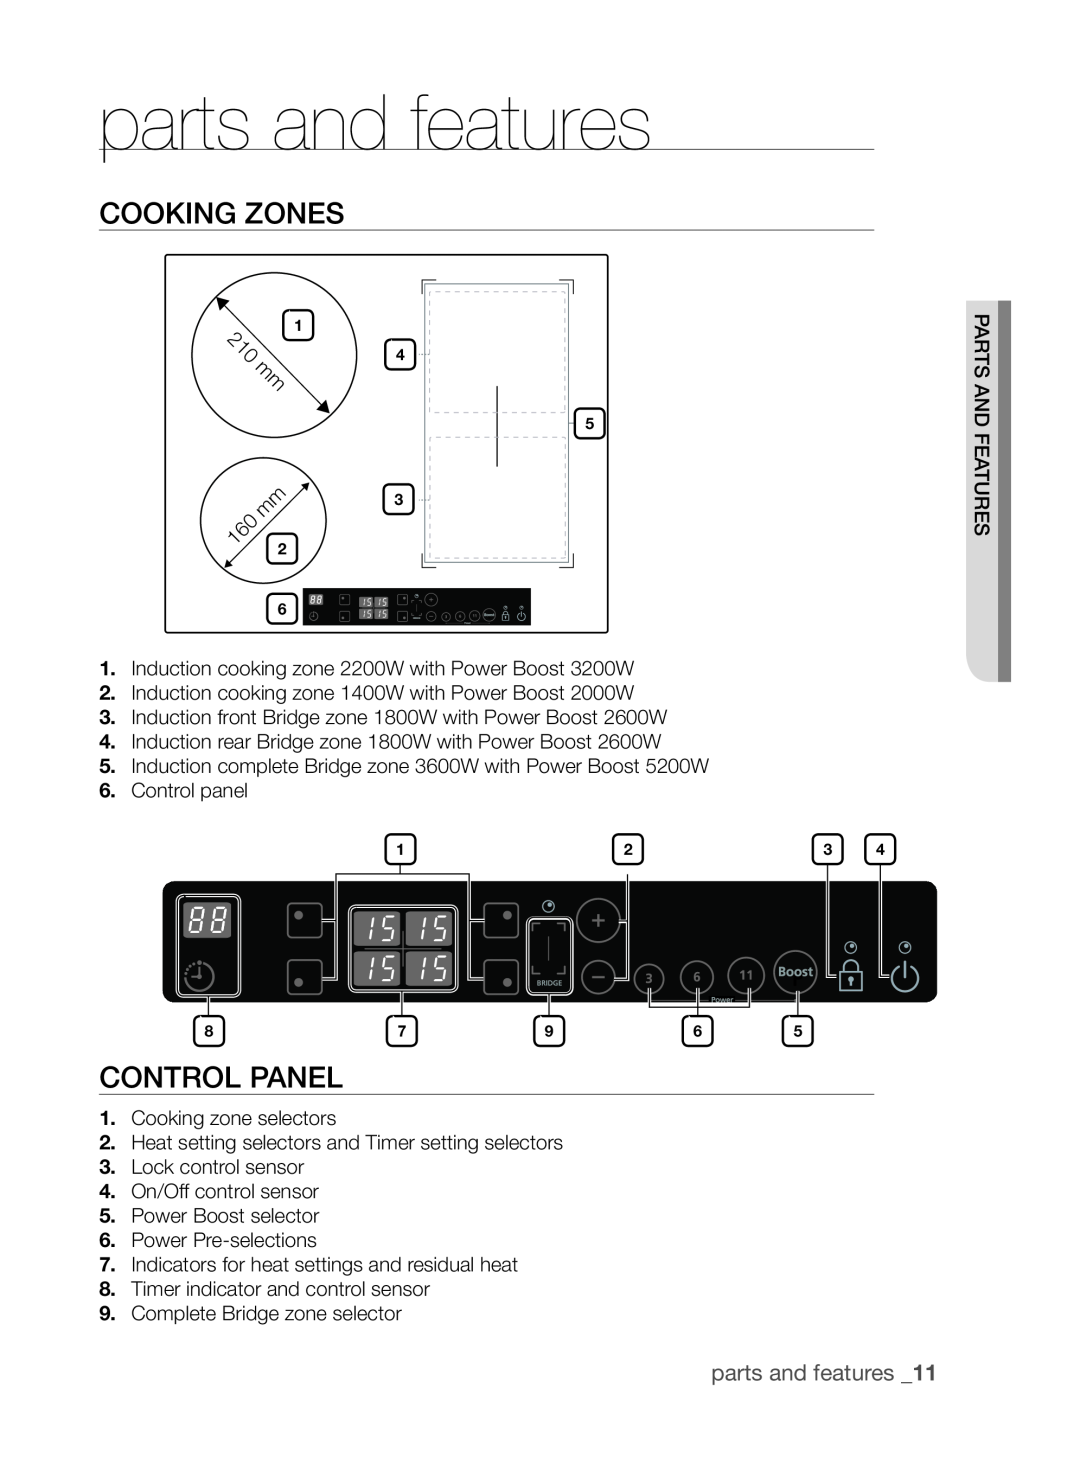 Samsung CTI613GI user manual parts and features, Cooking zones, control panel 